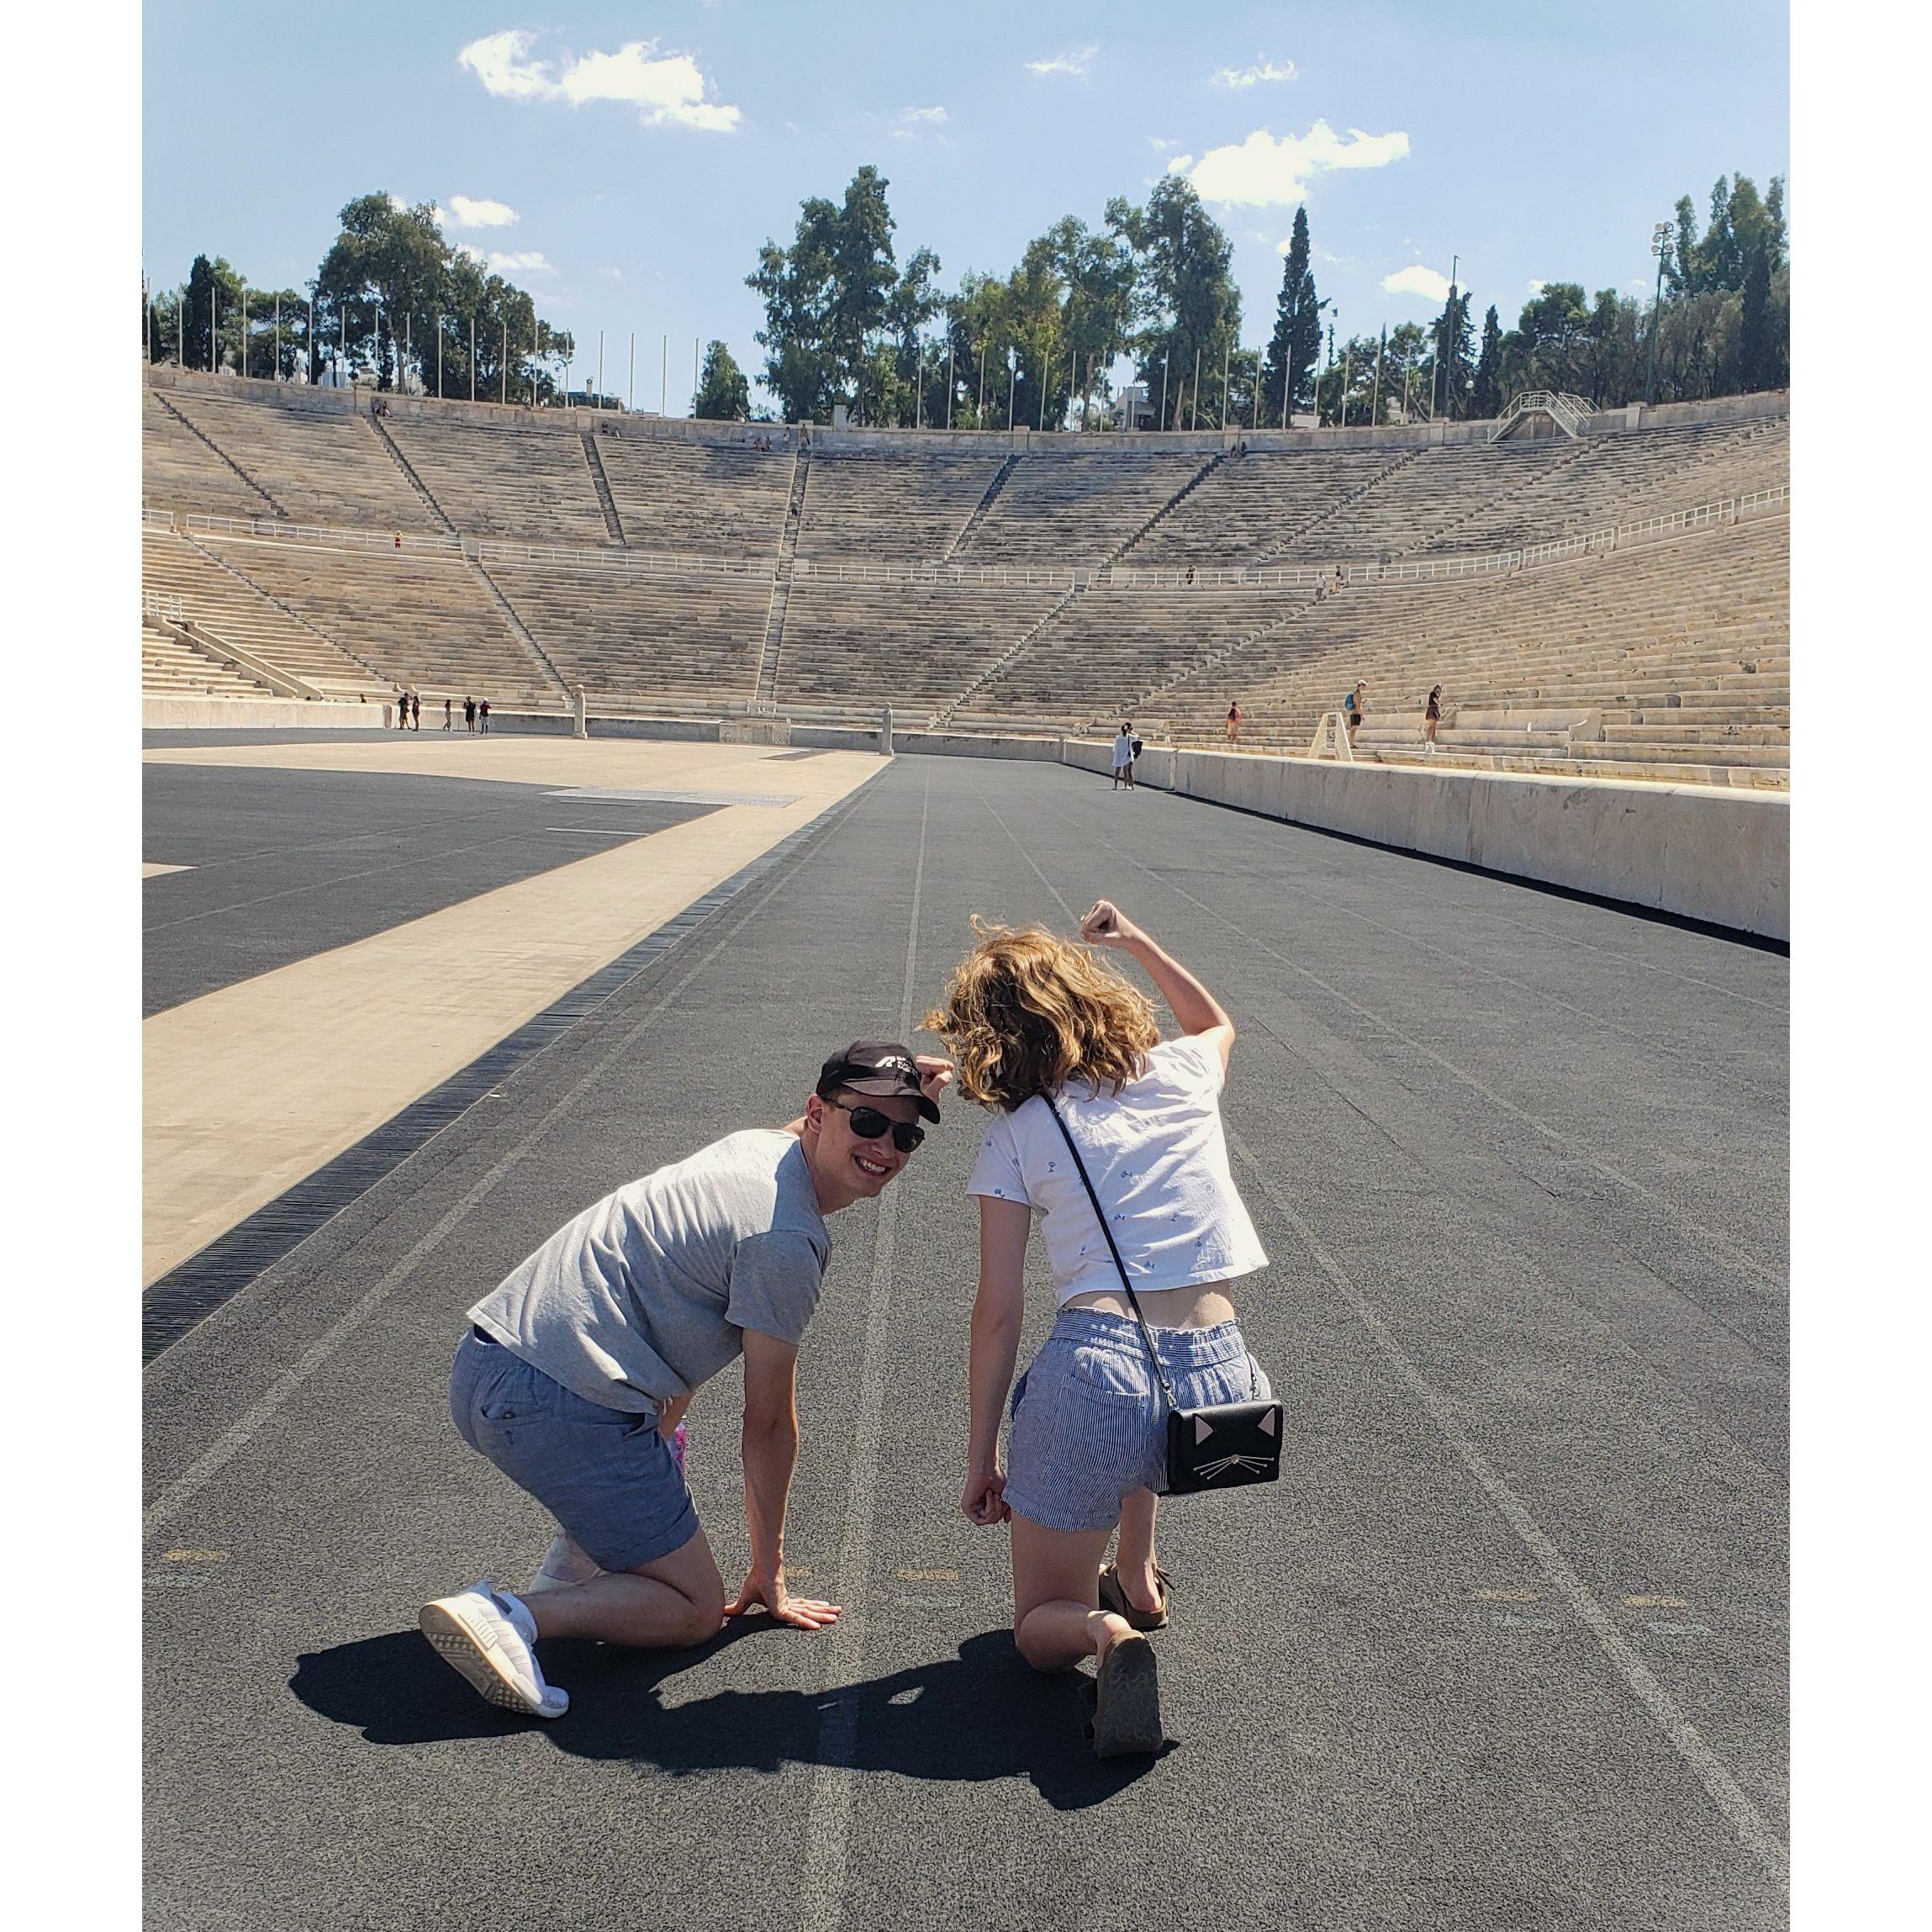 Racing each other at the Greek Panathenaic Stadium in Athens, Greece